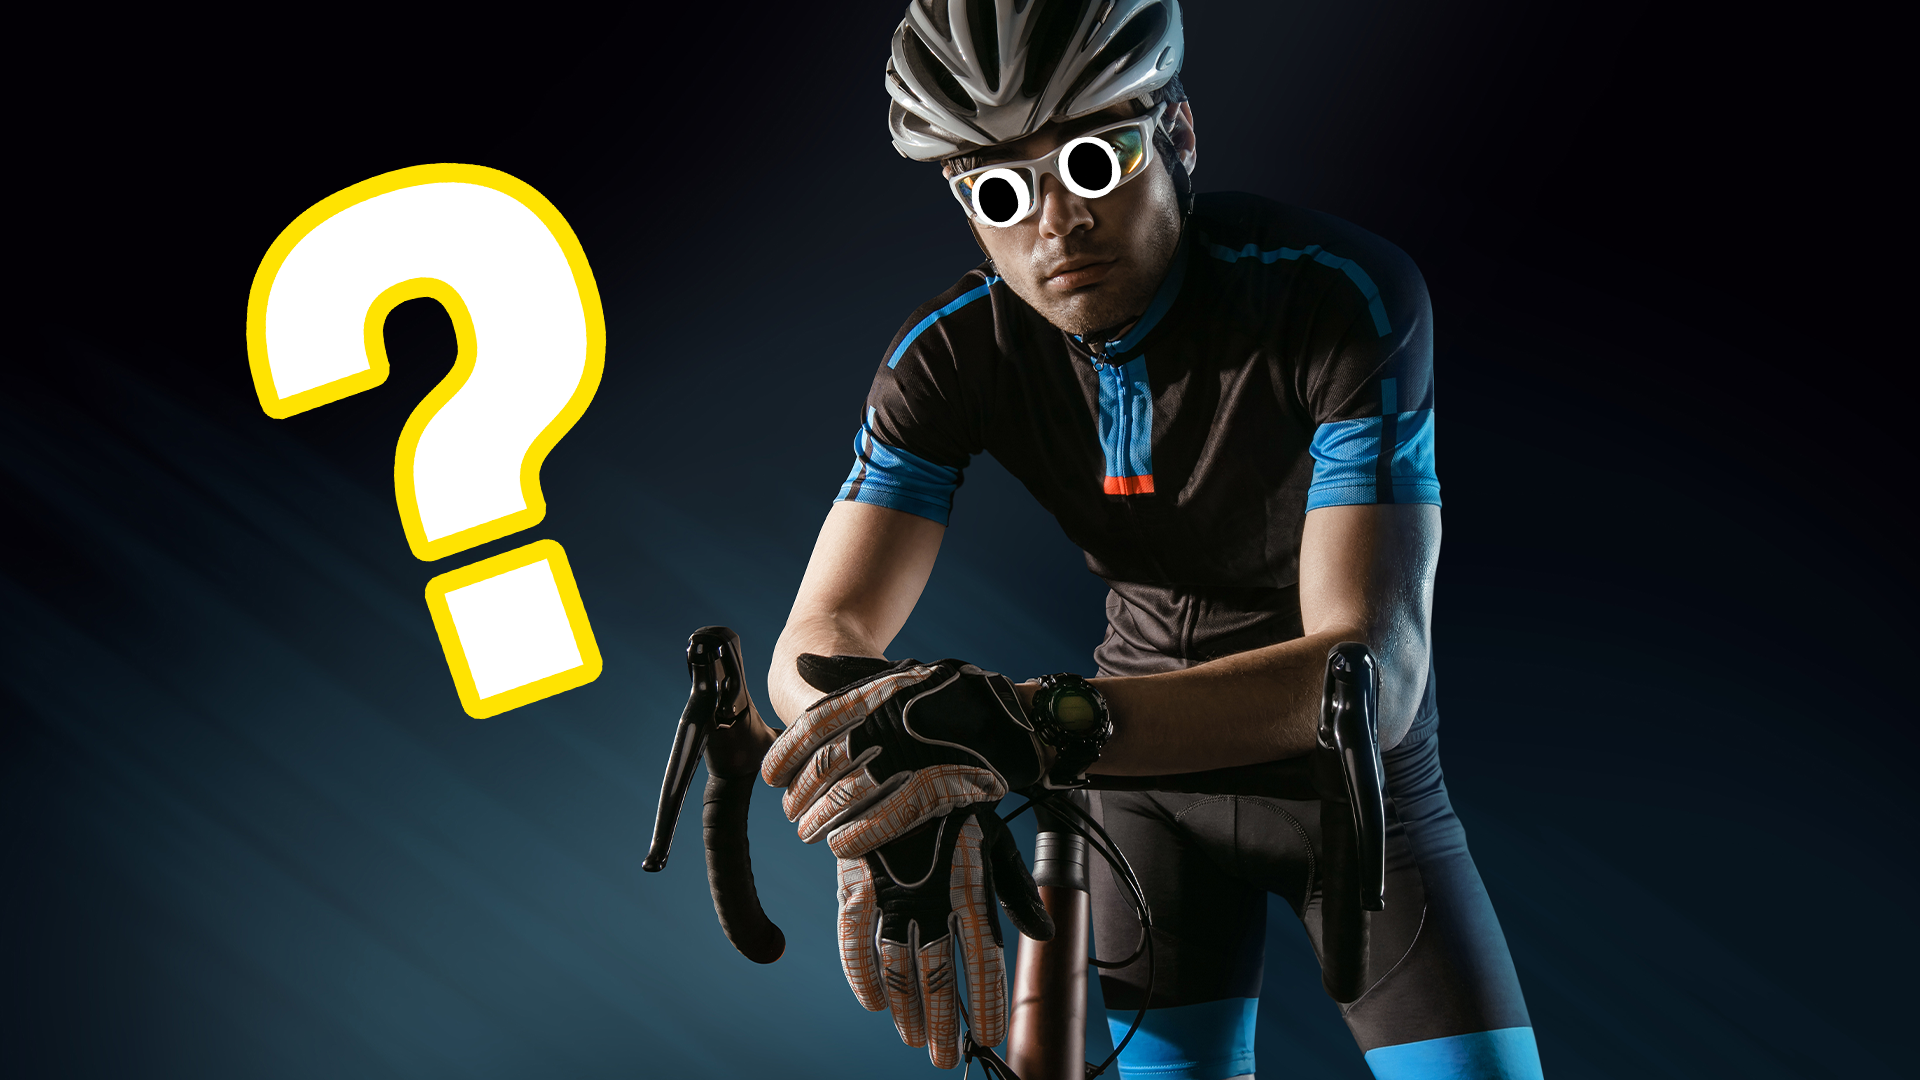 Cyclist on dark background with question mark